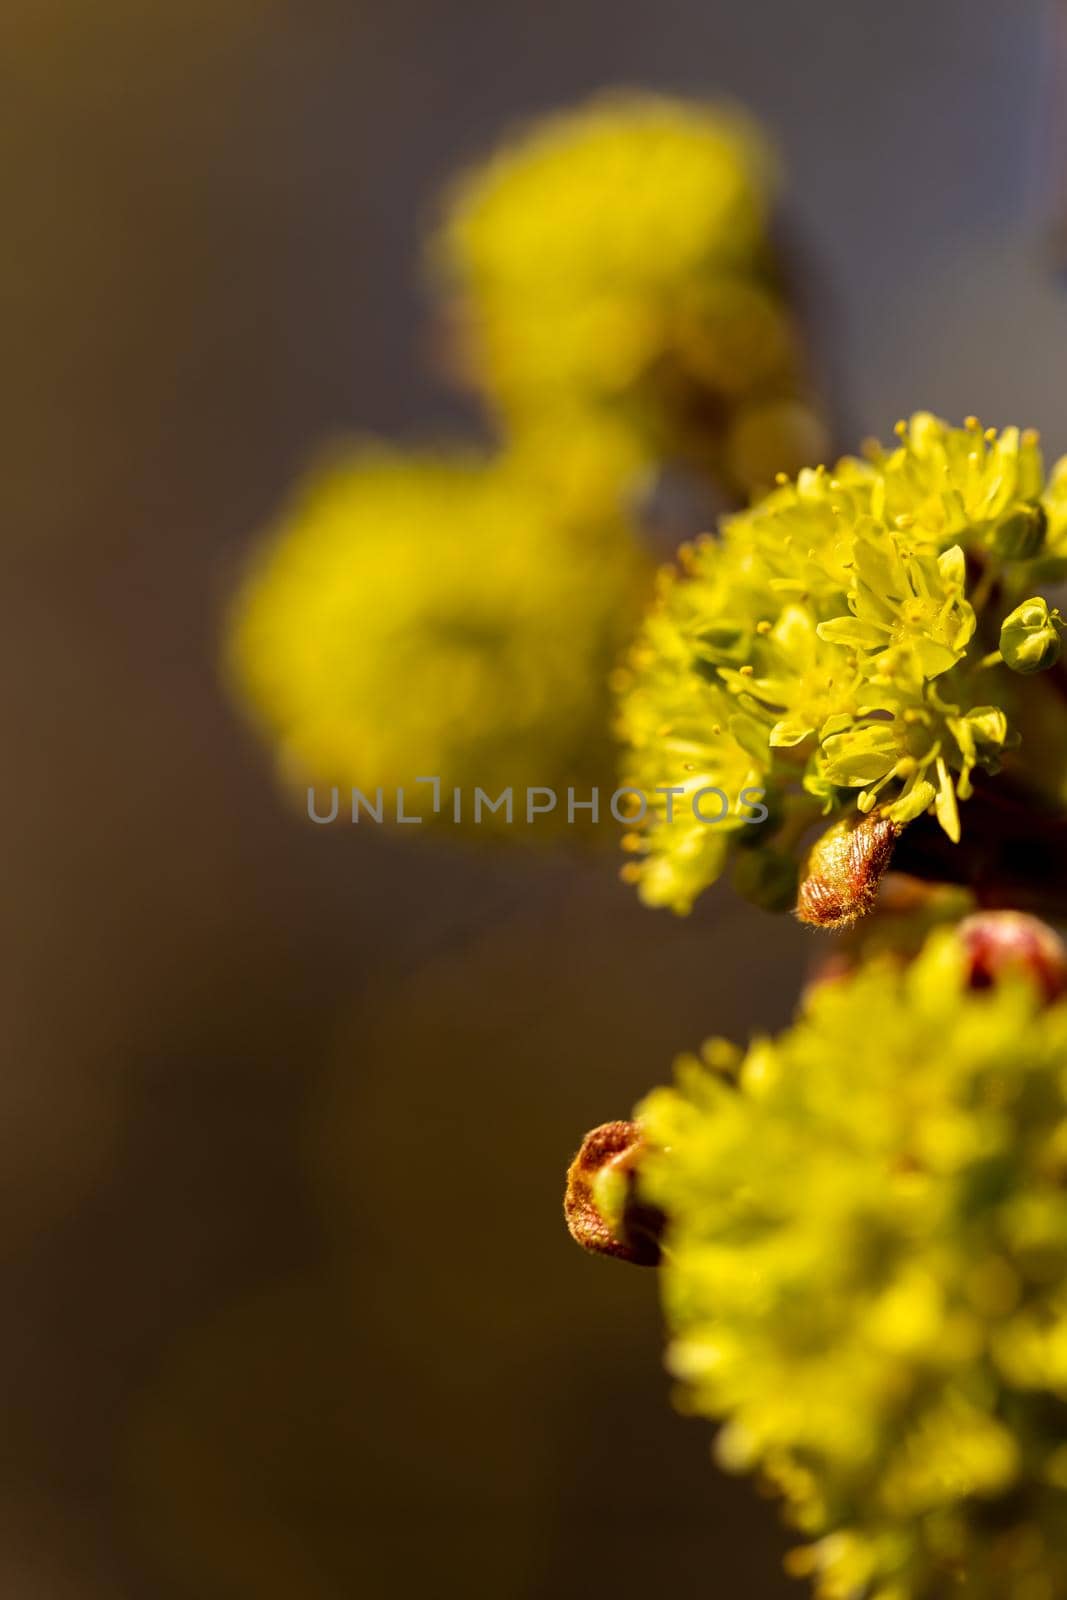 Blooming flowers of maple trees in the spring, close-up macro view